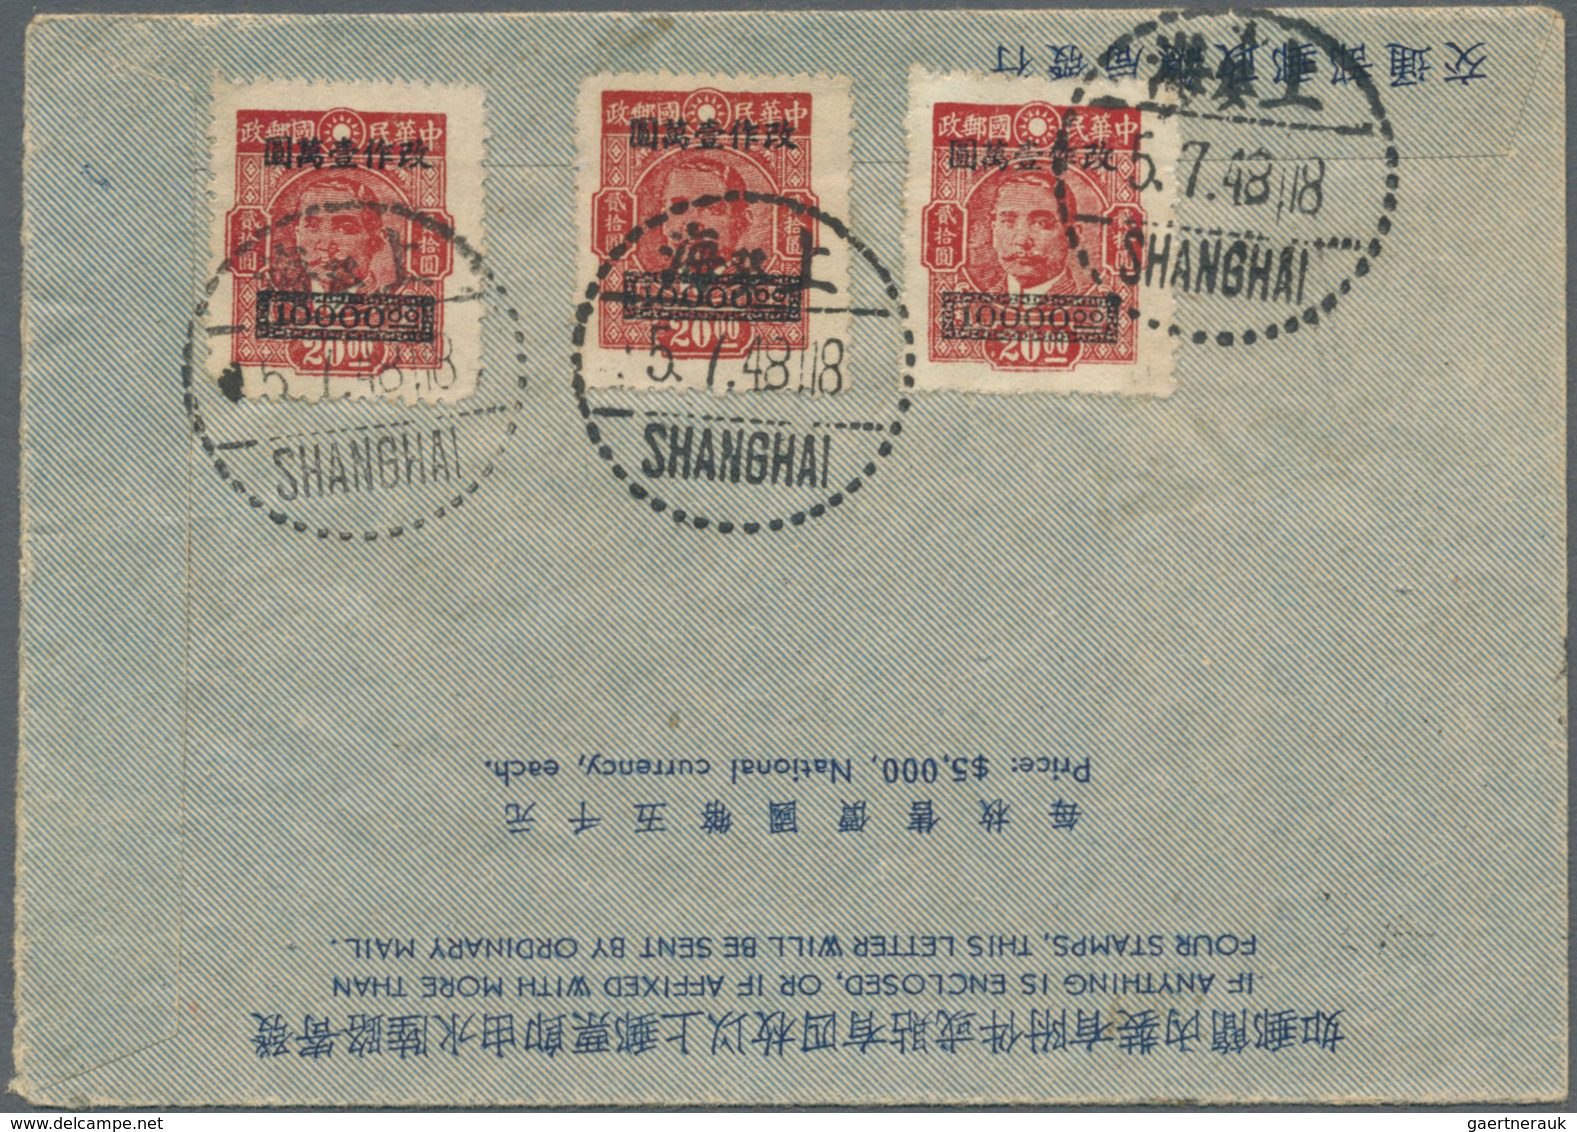 China - Ganzsachen: 1948, Plum Blossoms $50.000 With Ovpts. $10.000/$20 (3), $5.000/$100 For A $85.0 - Postcards